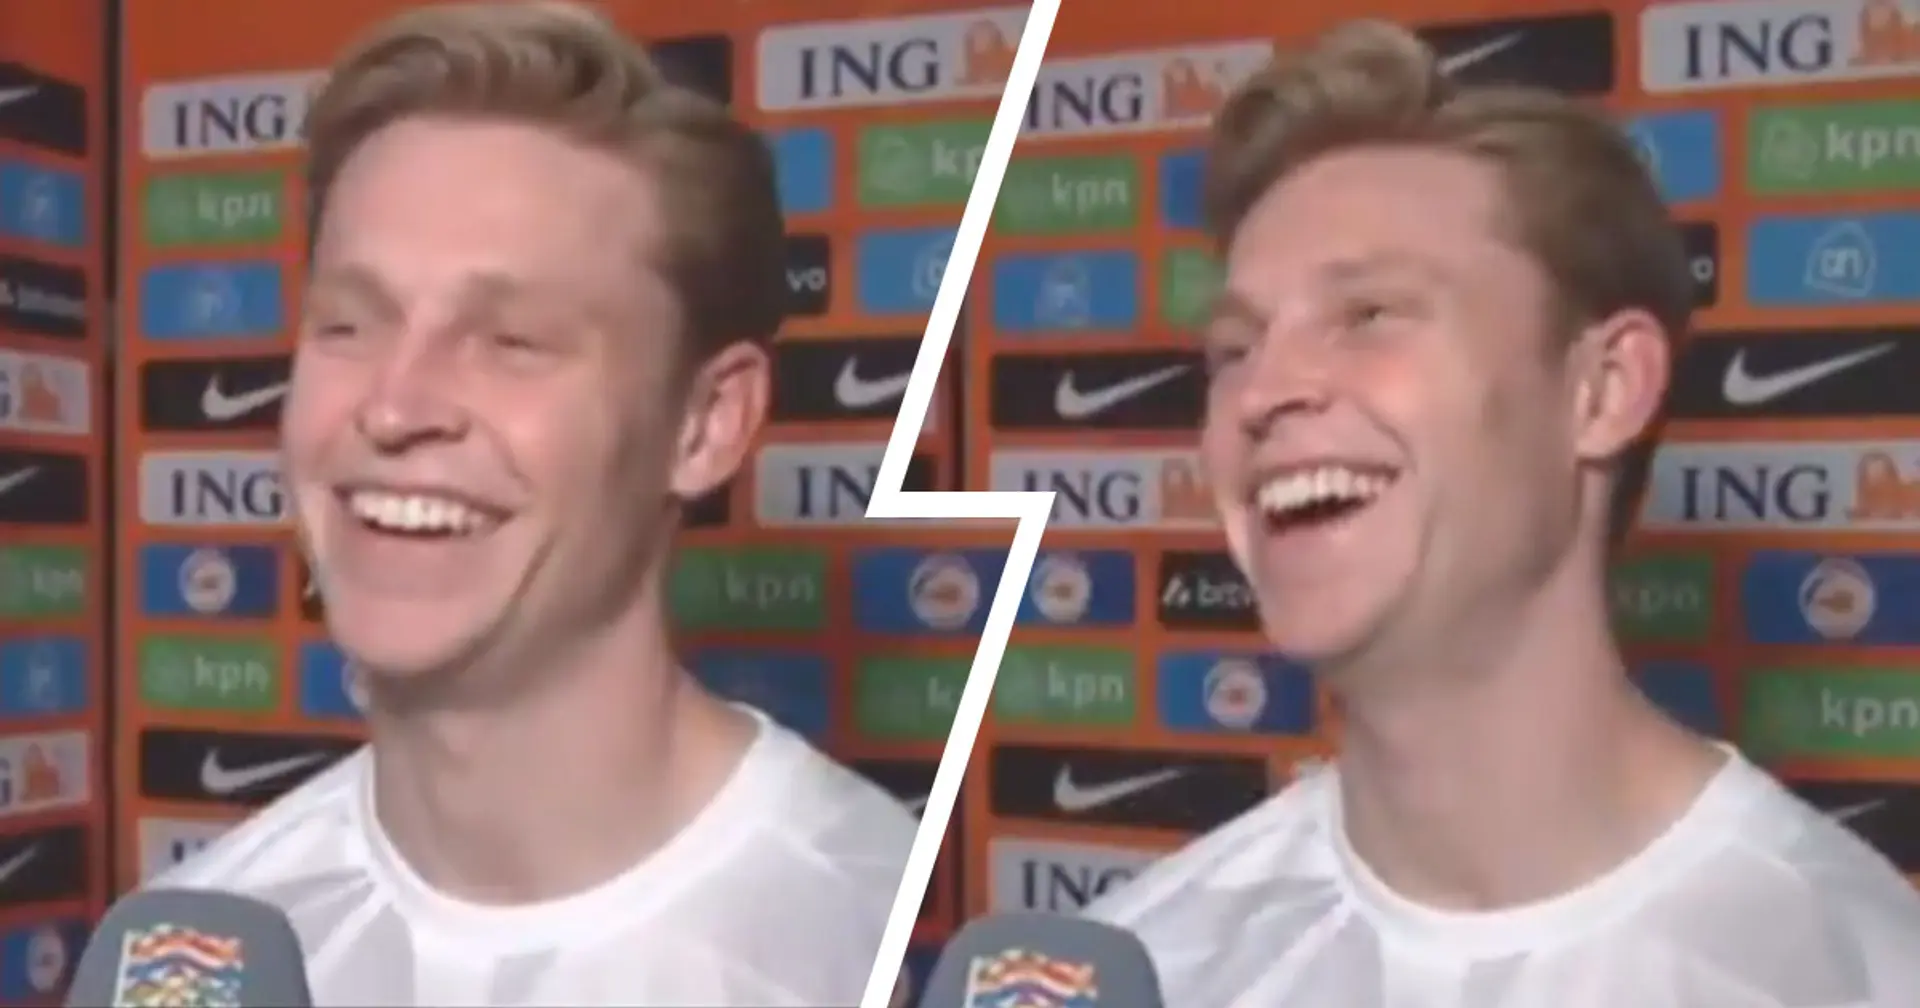 Frenkie de Jong laughs when asked quirky question on United move - gives very short answer